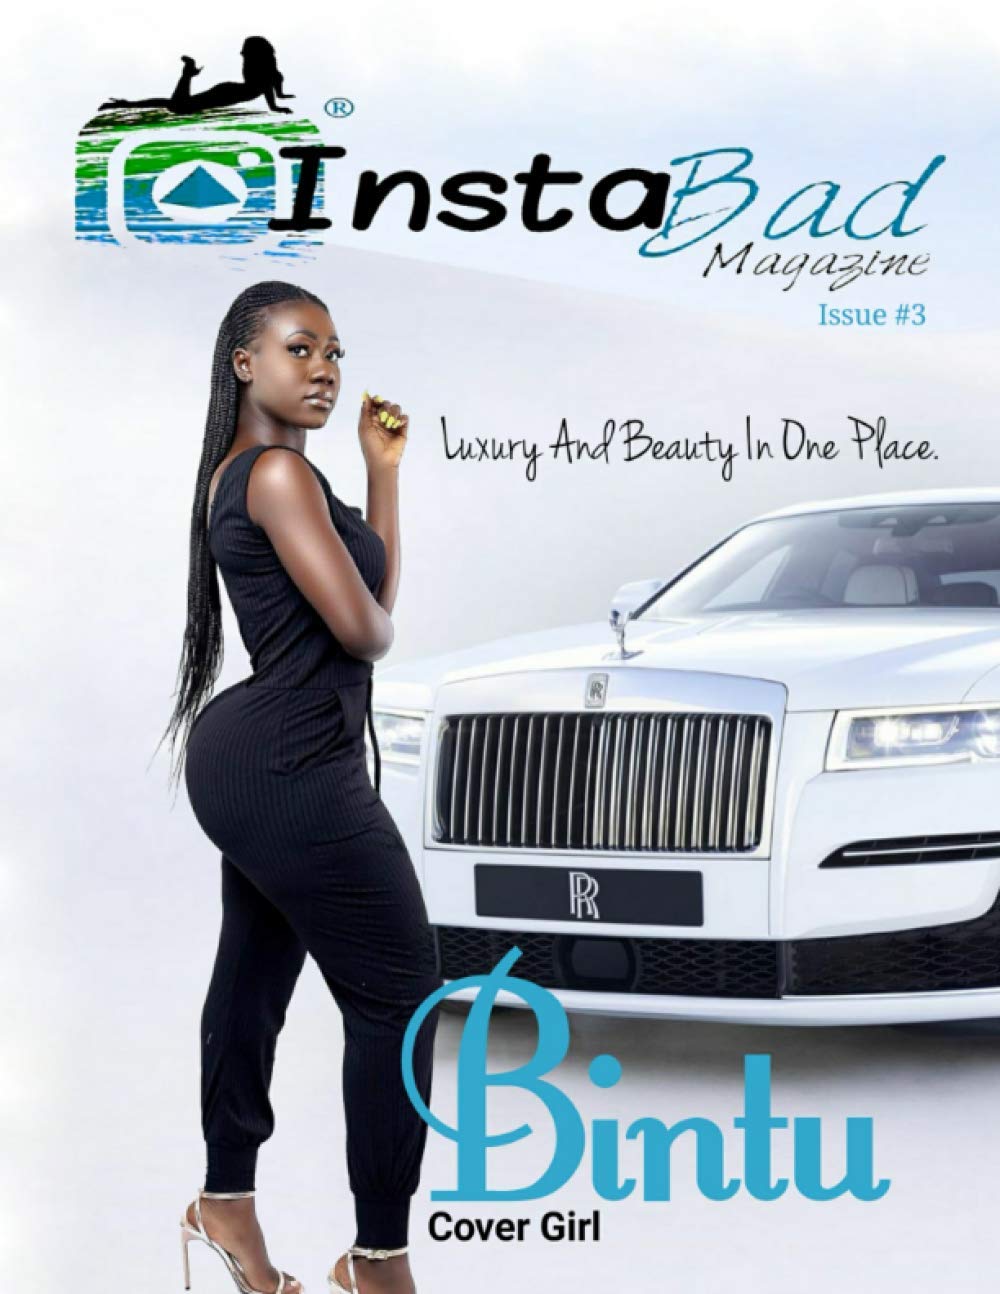 InstaBad magazine issue #3 (Buy Only)